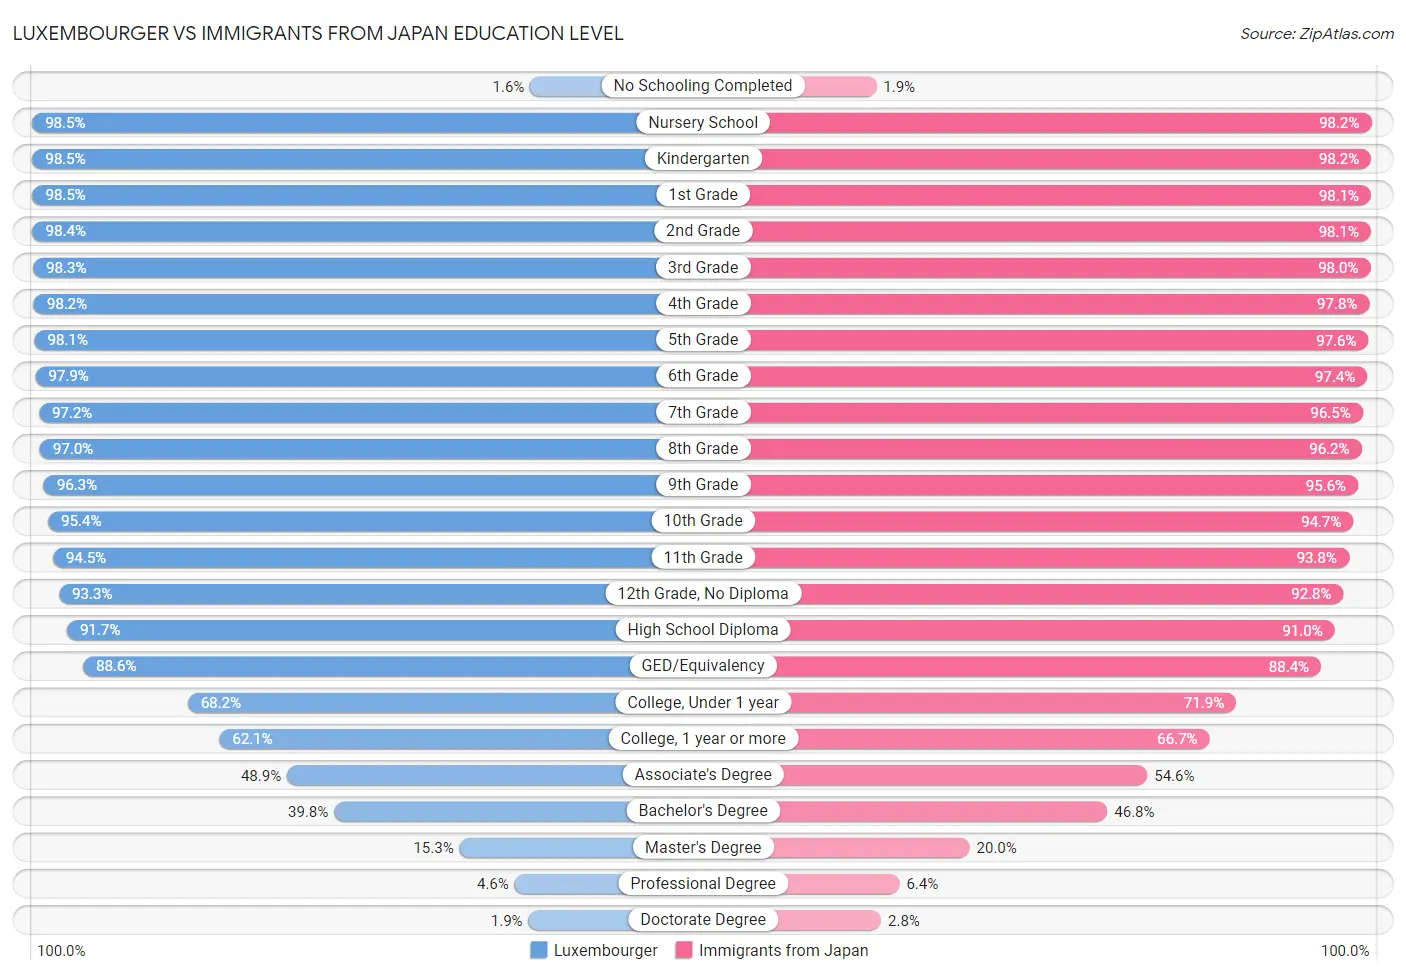 Luxembourger vs Immigrants from Japan Education Level